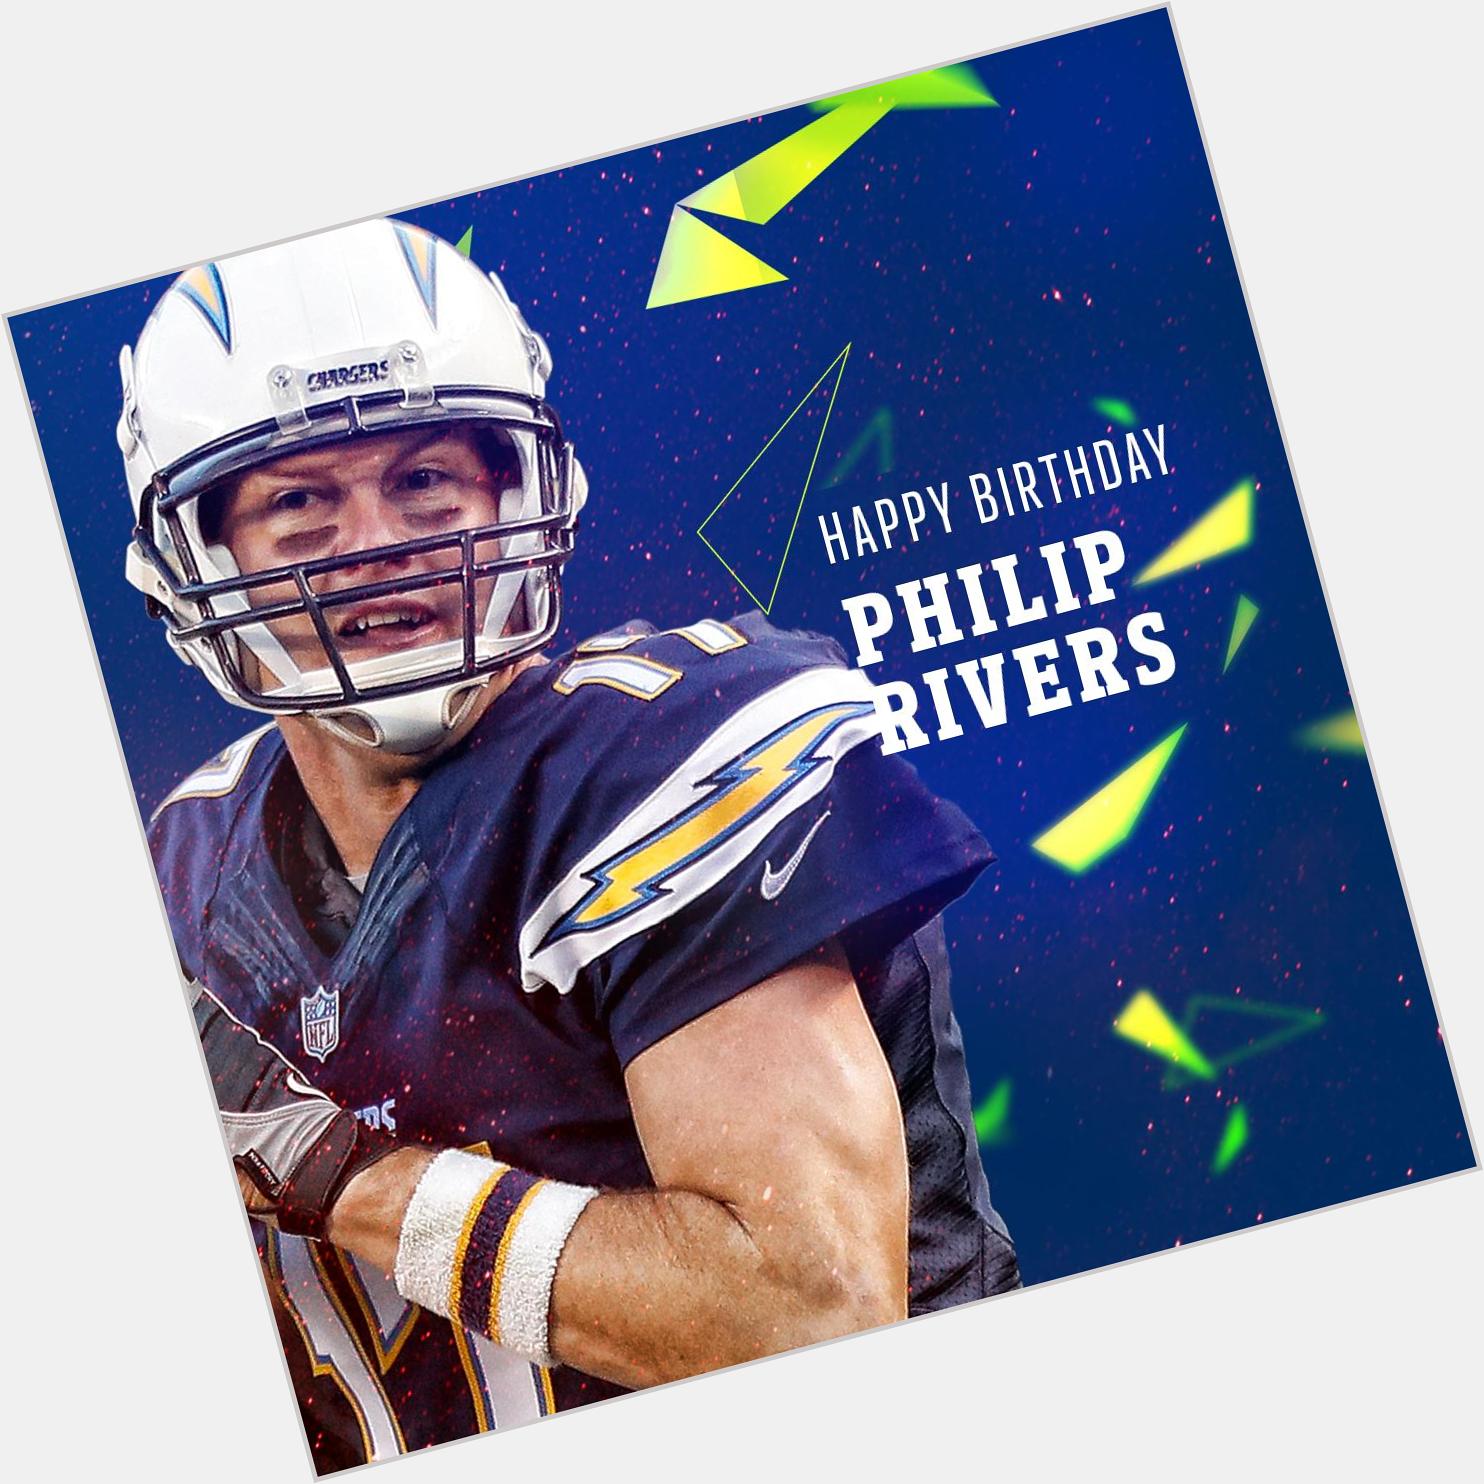       Join us in wishing QB Philip Rivers a HAPPY BIRTHDAY! 